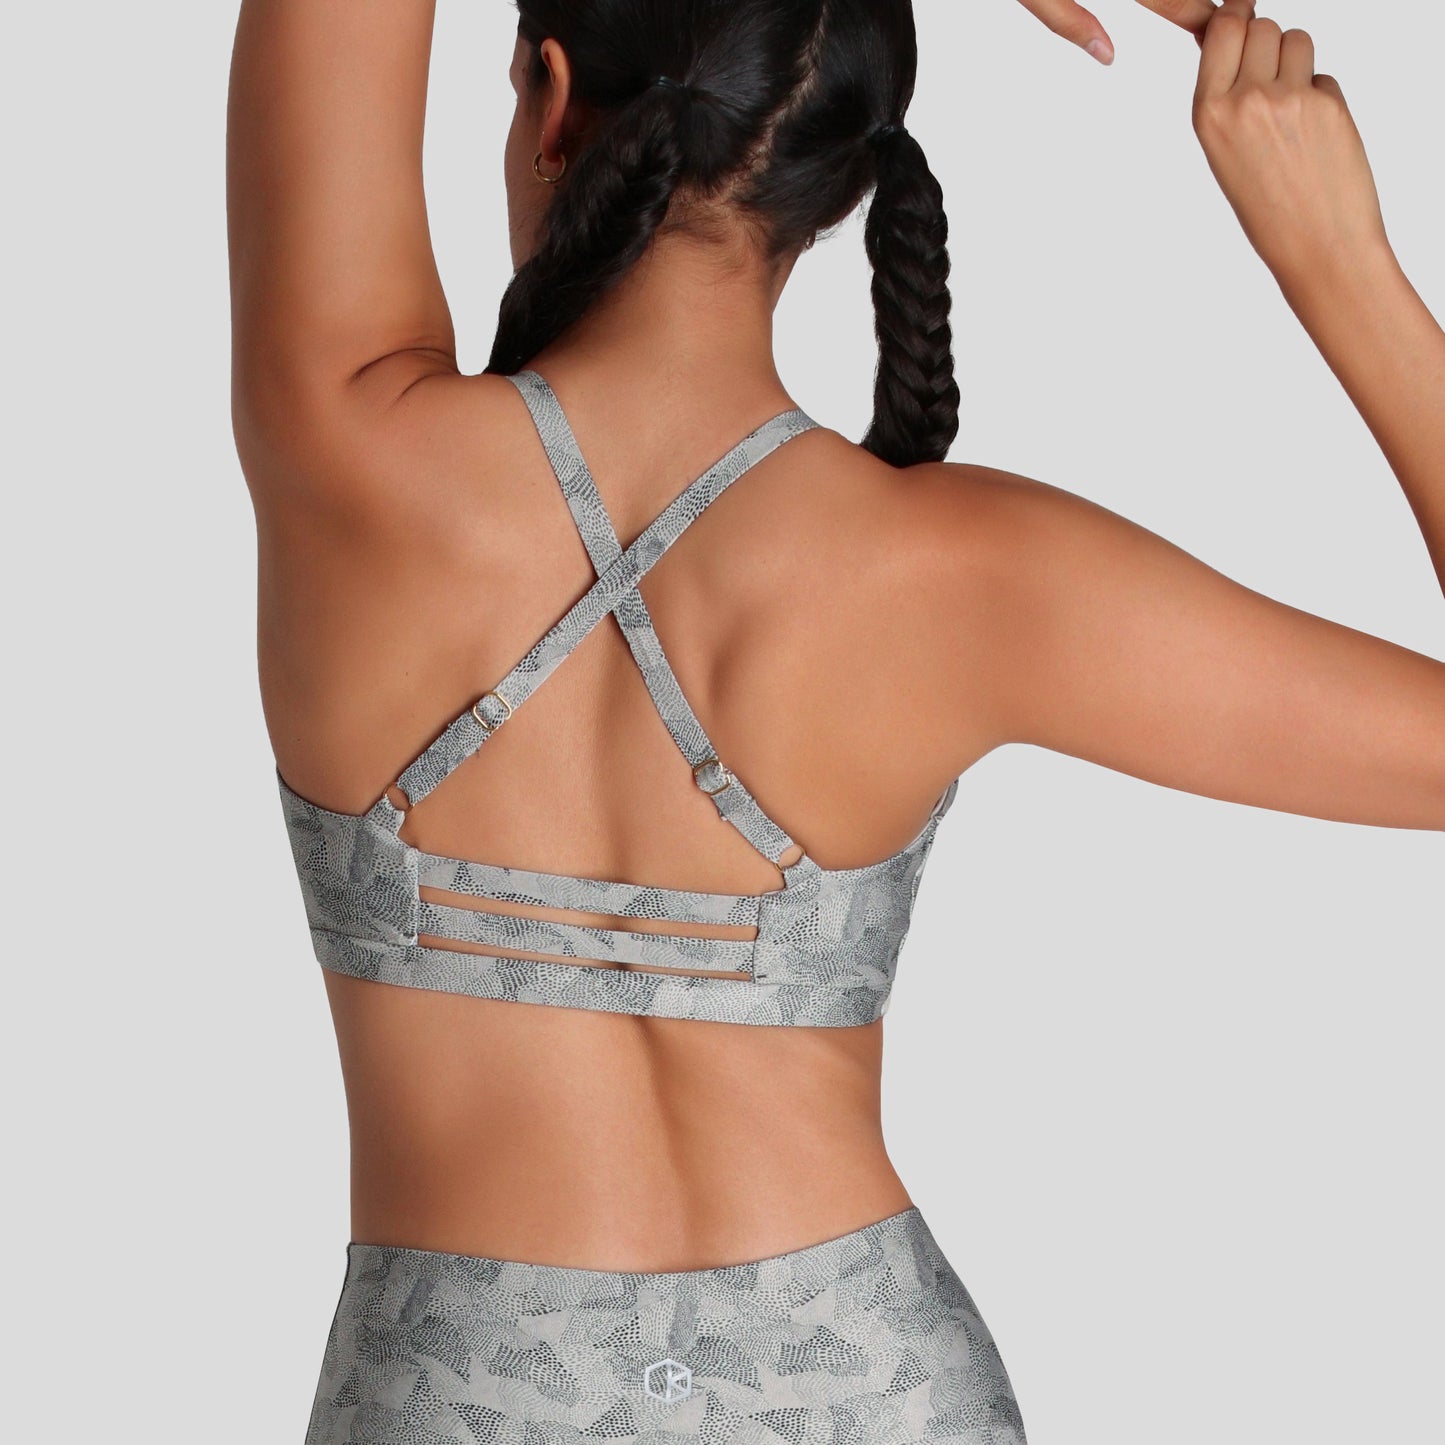 Printed TOP for exercising